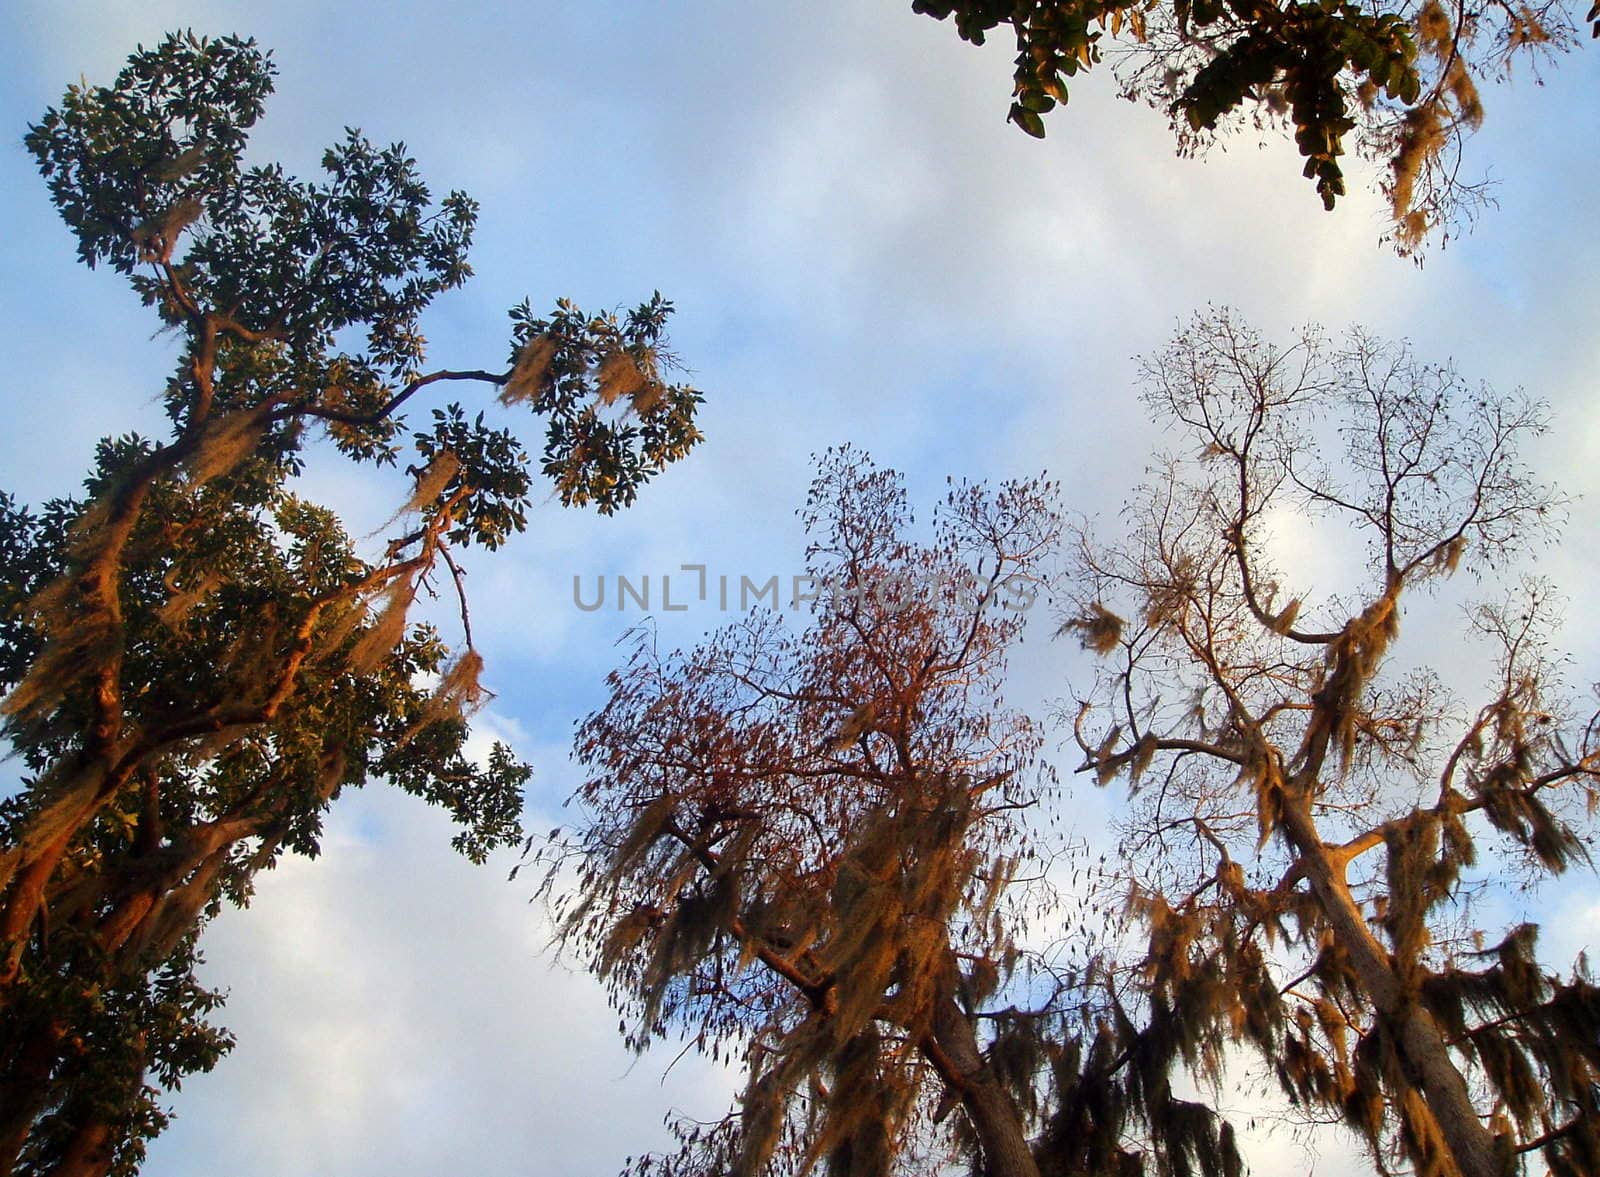 View of unusual trees from below with blue sky and clouds.